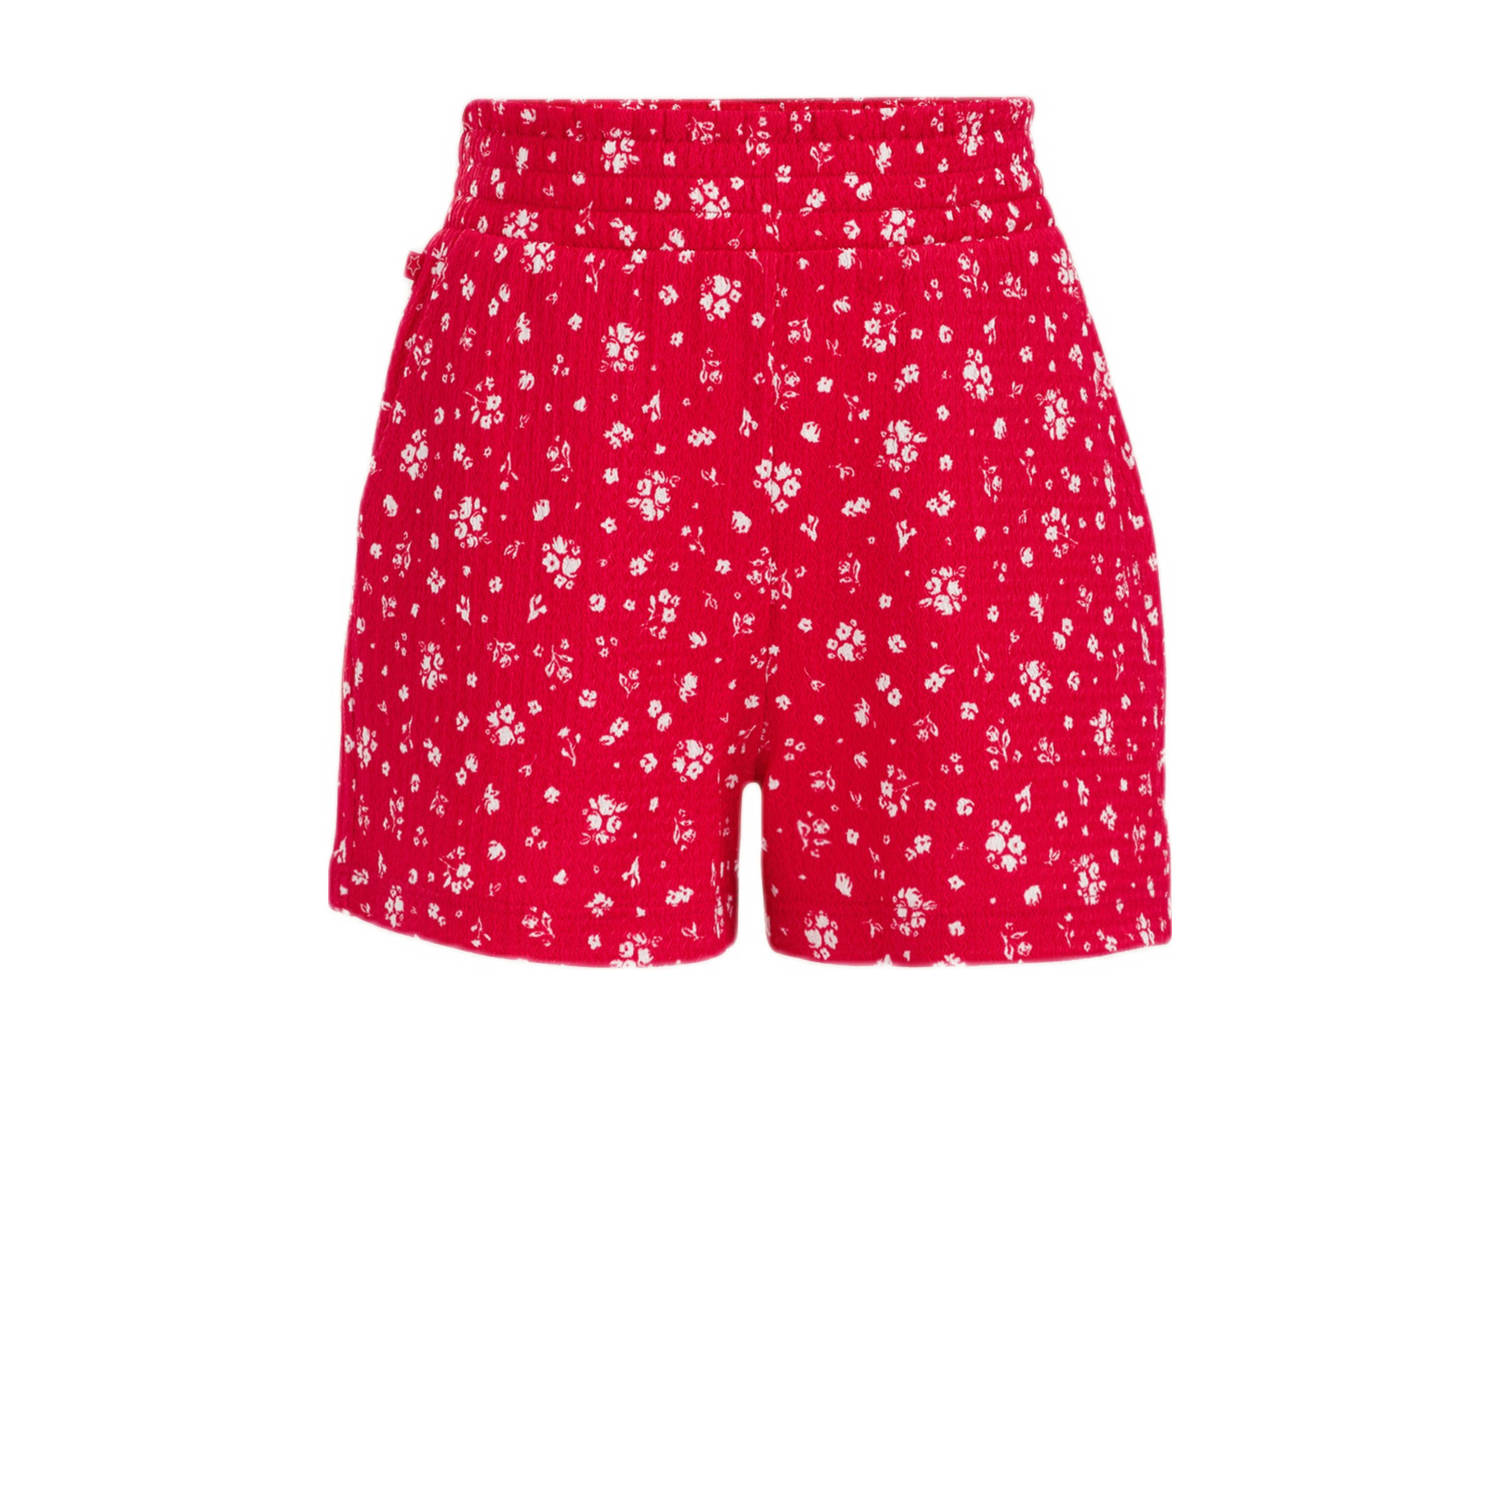 WE Fashion straight fit casual short met all over print rood Korte broek Meisjes Gerecycled polyester 110 116